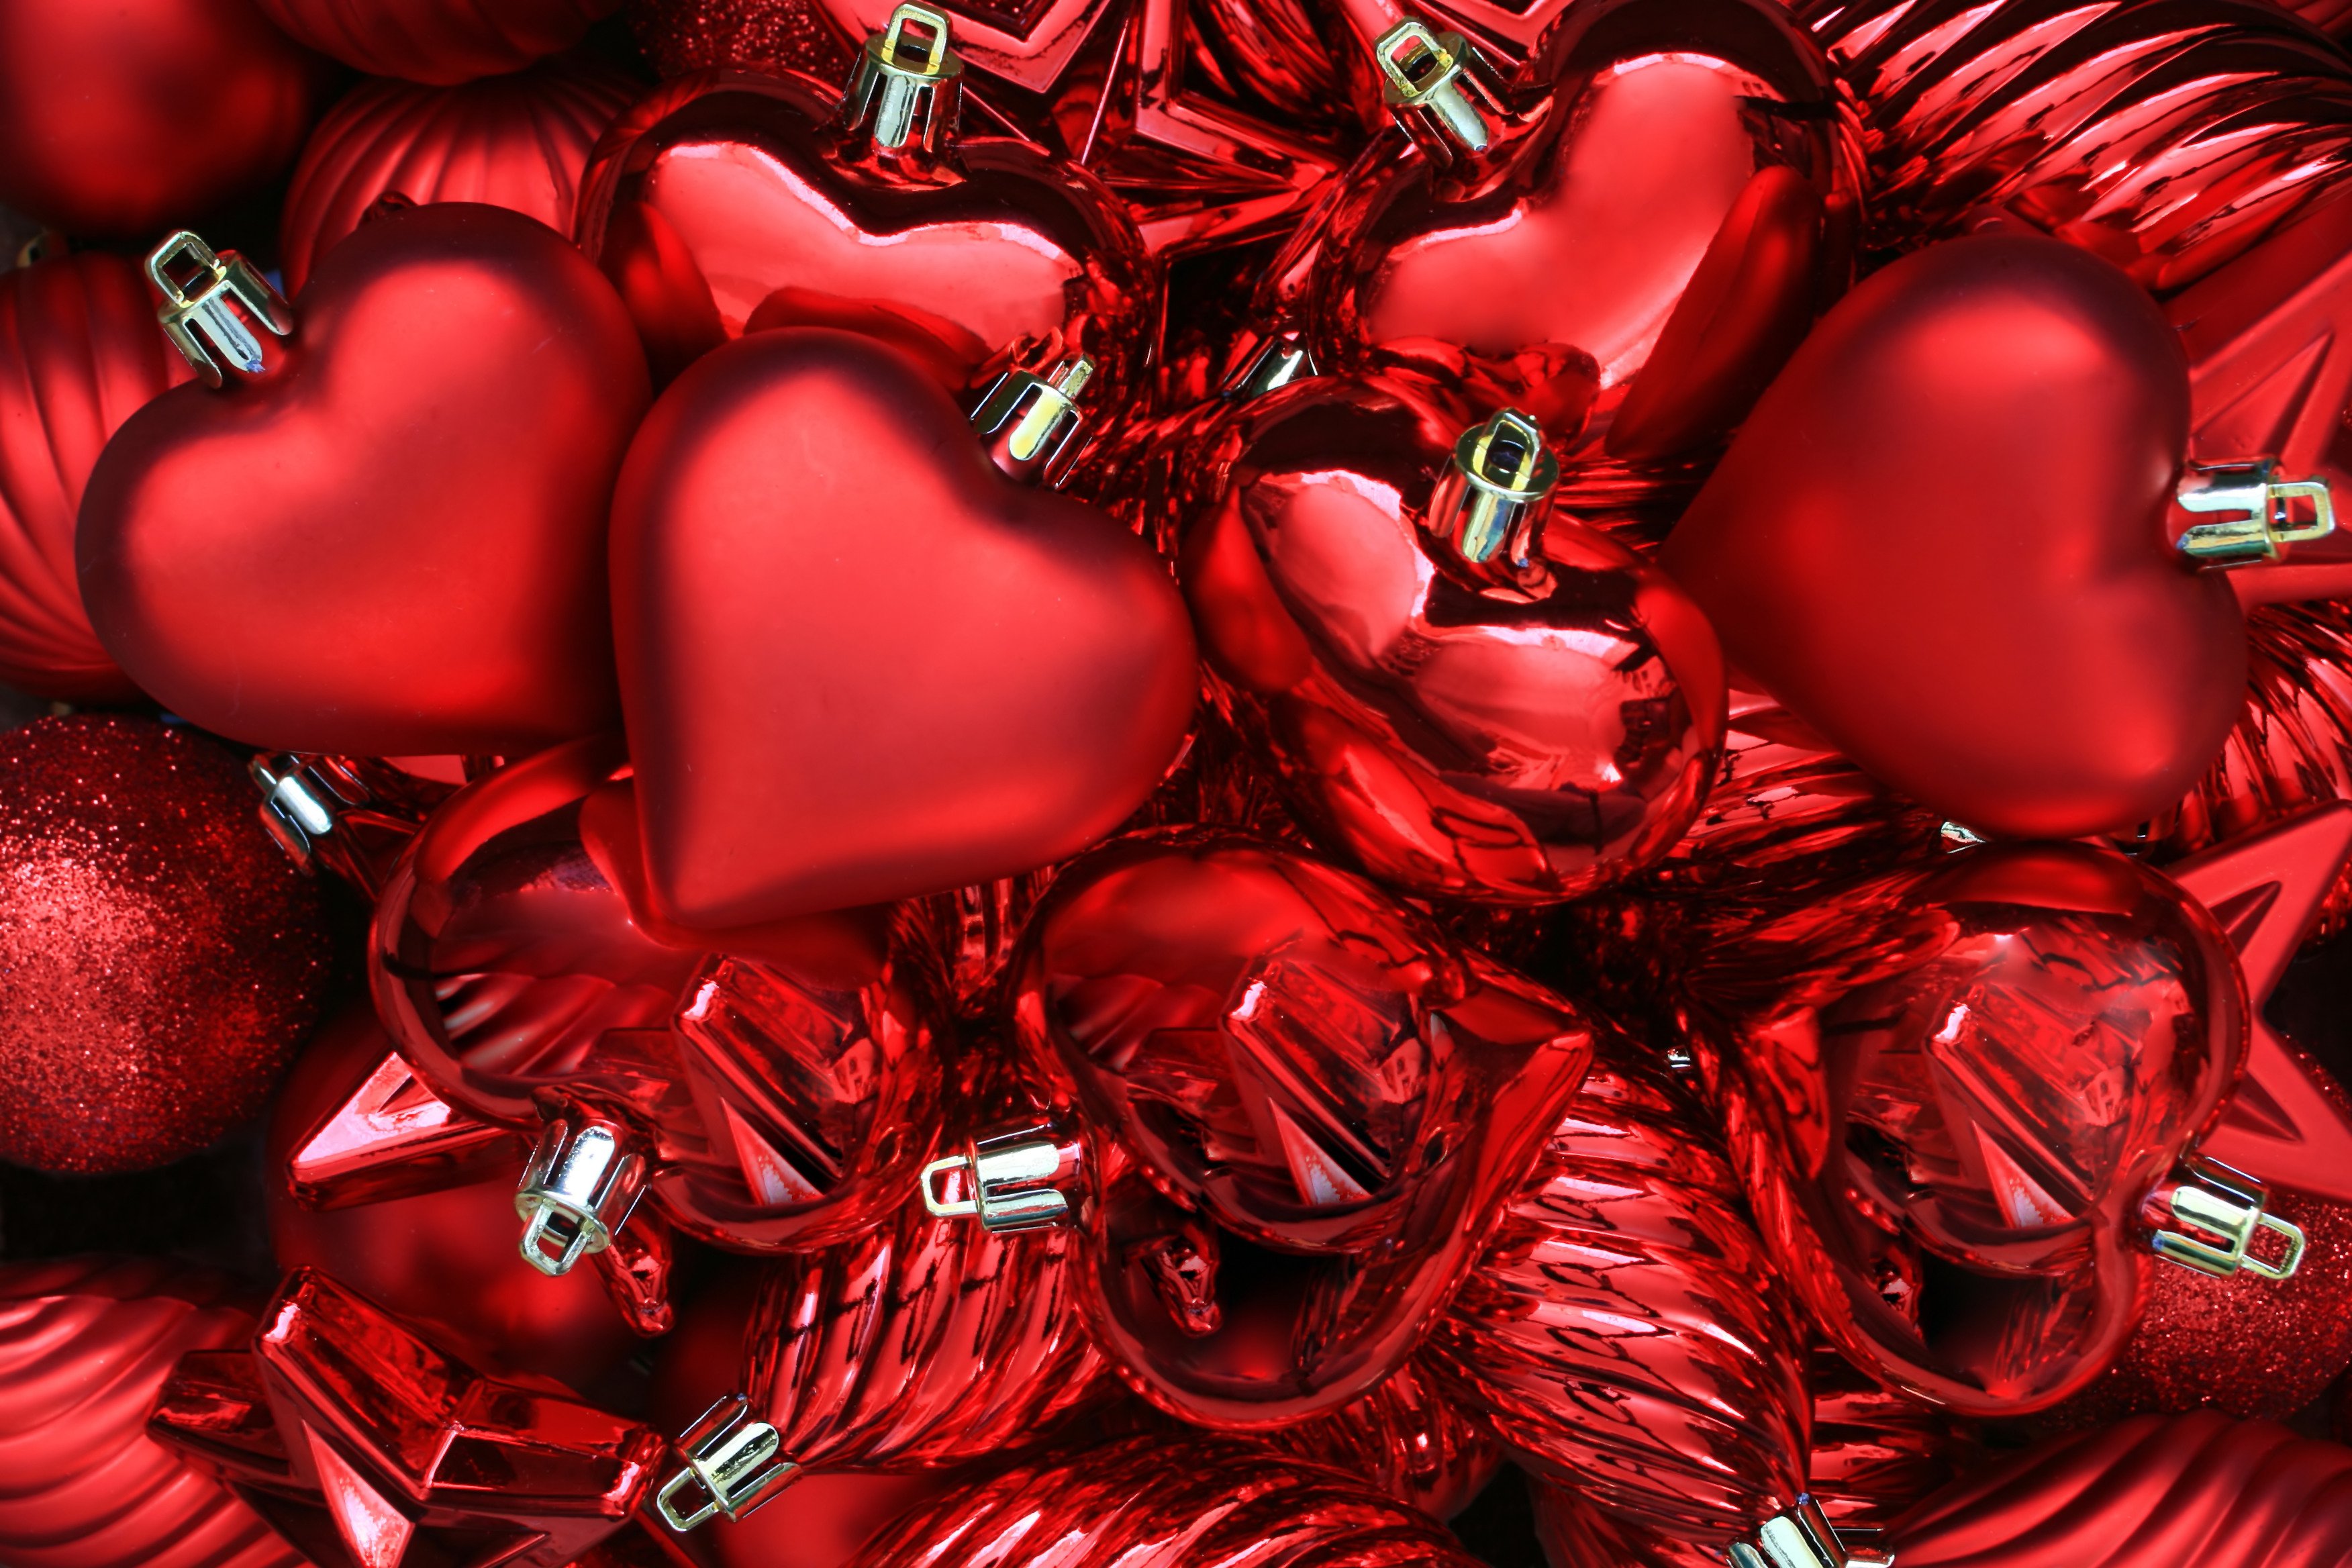 valentines, Day, Holiday, Mood, Love, Heart Wallpaper